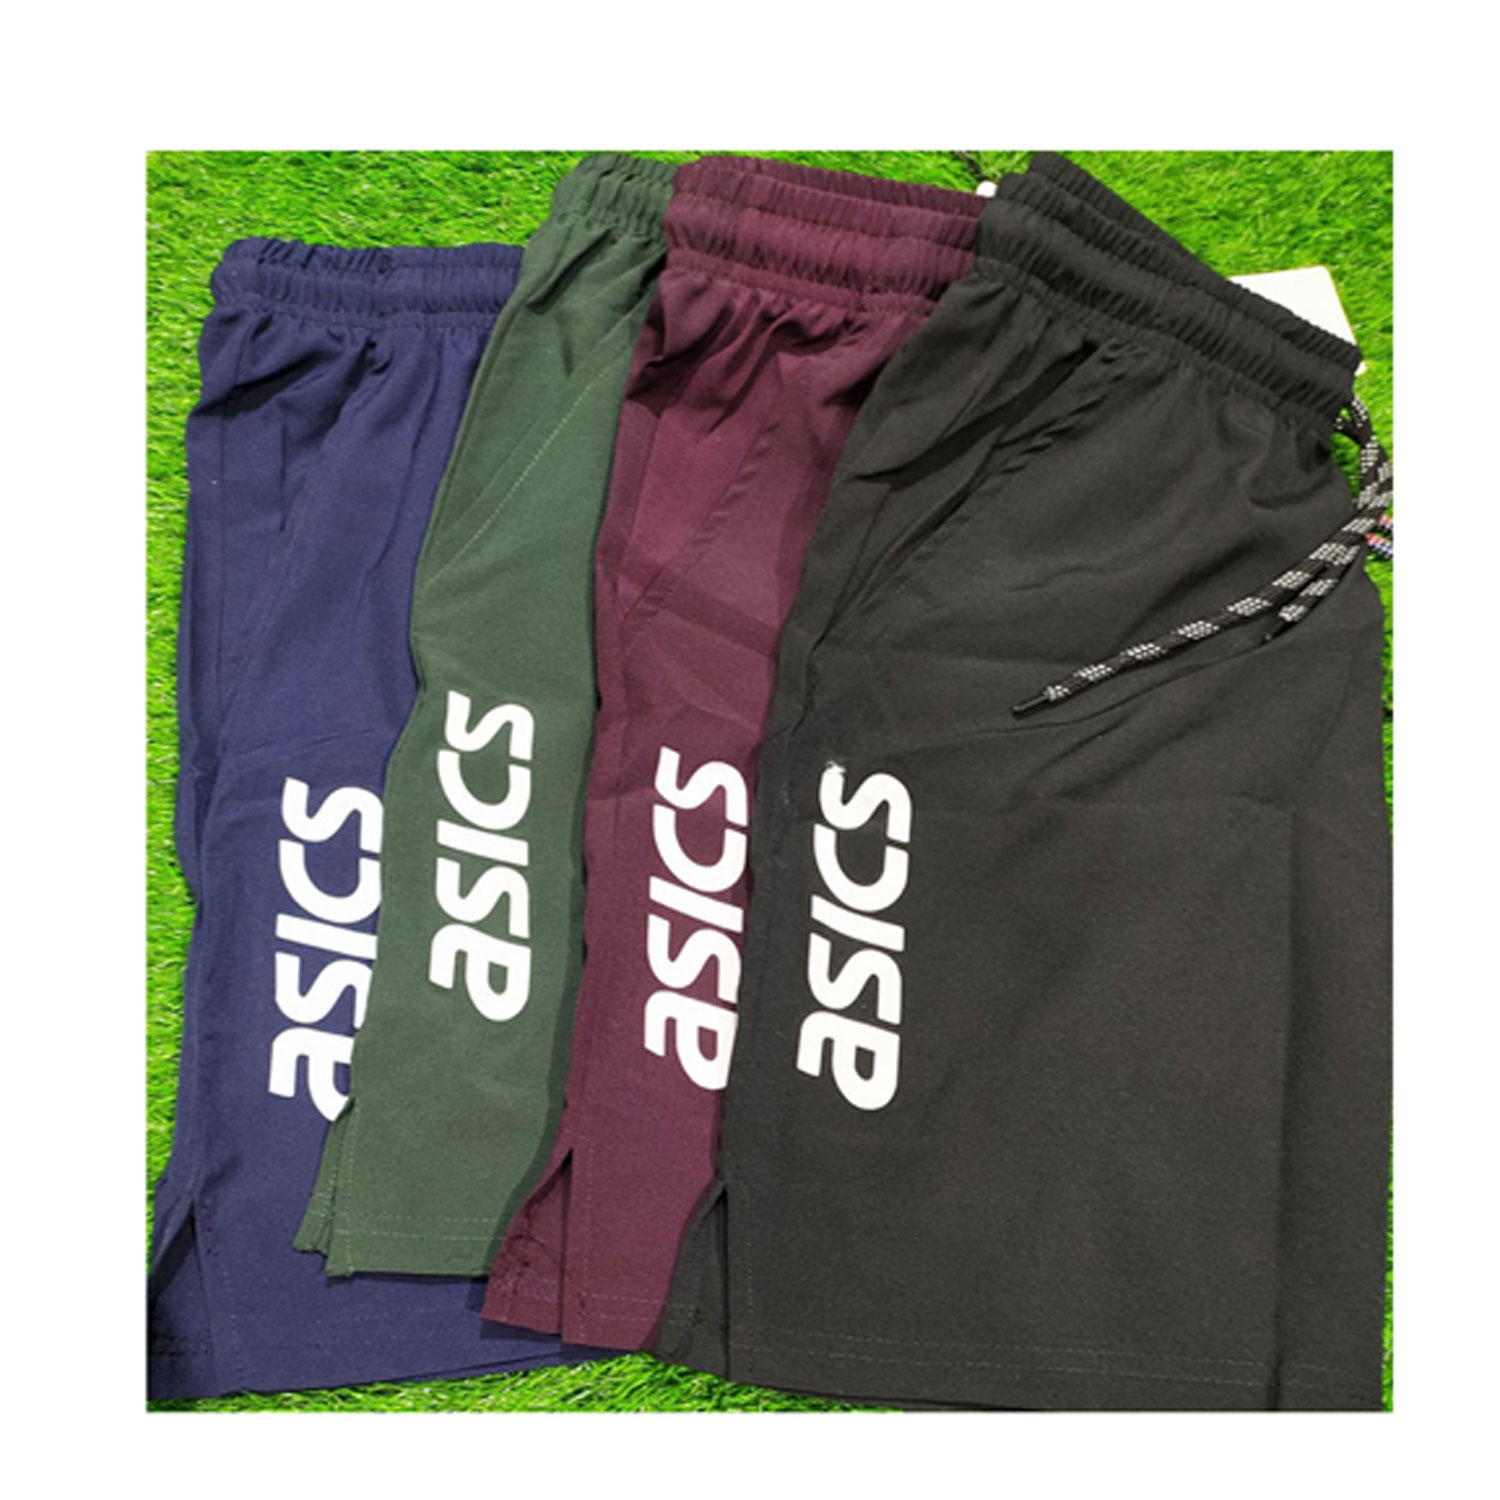 ADDAISTIC NS DRYFIT SPORTS SHORTS ASICS (pack of 4)